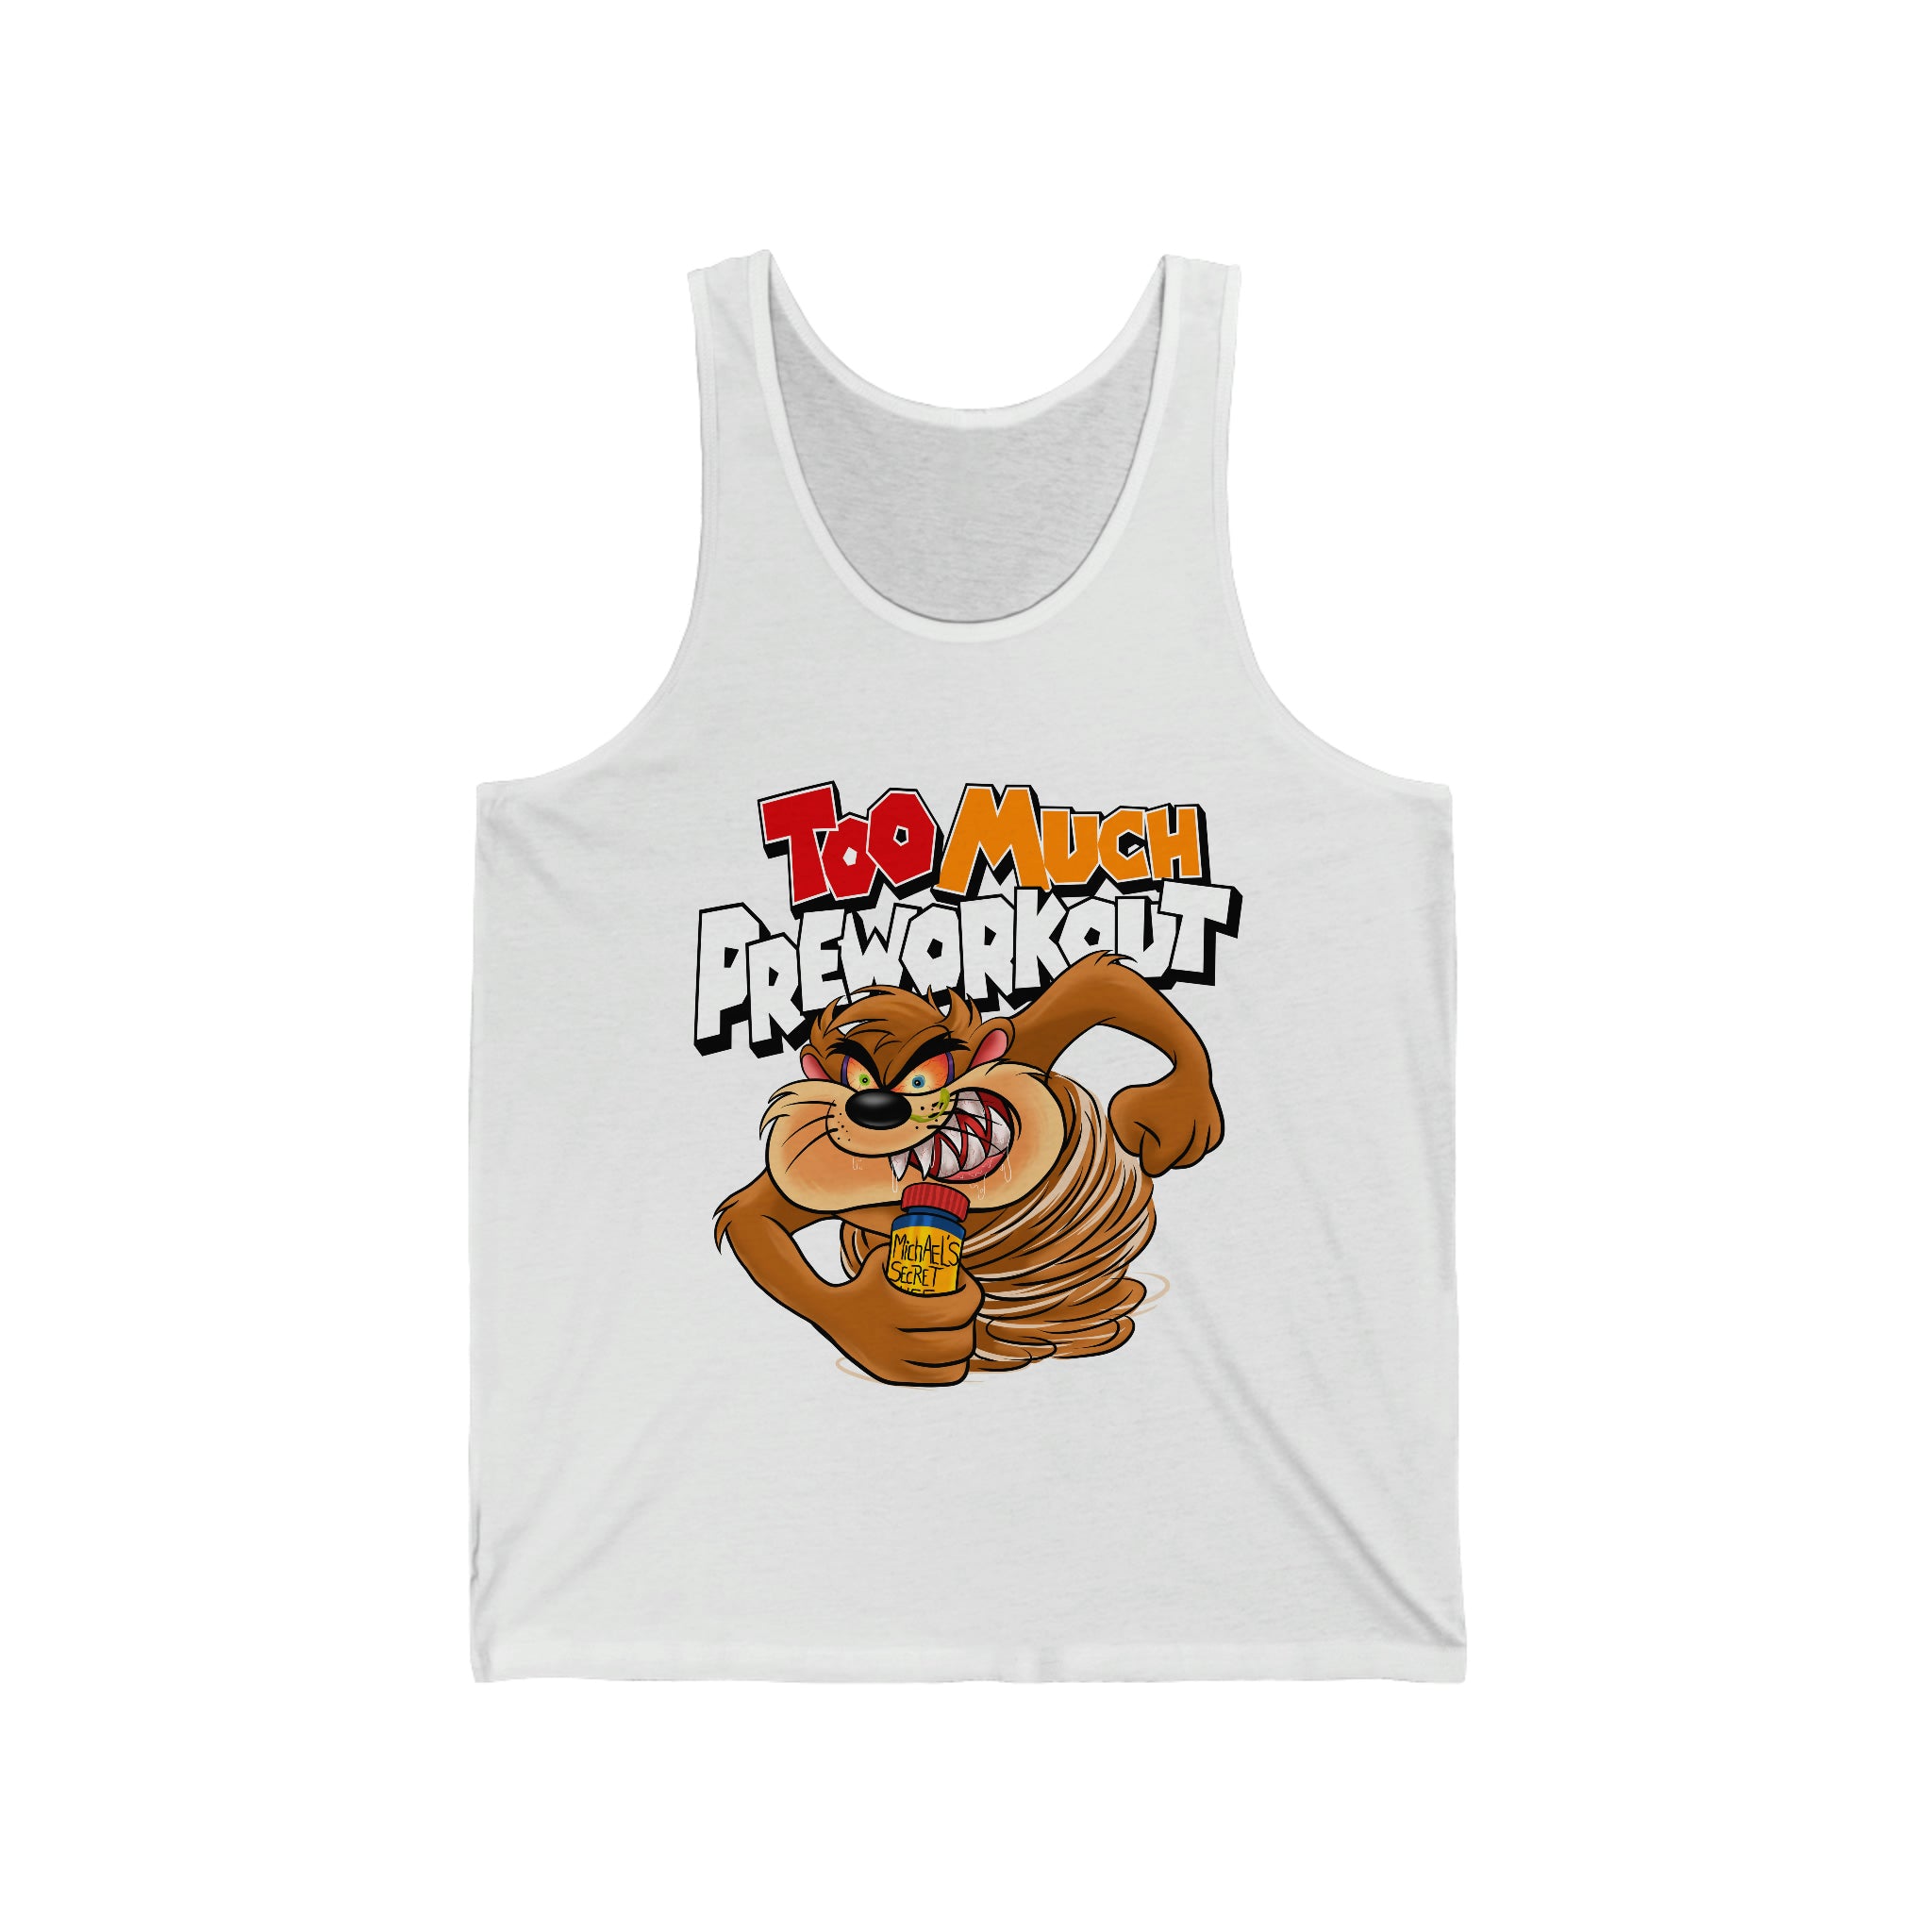 Too Much Pre-workout Unisex Tank Top